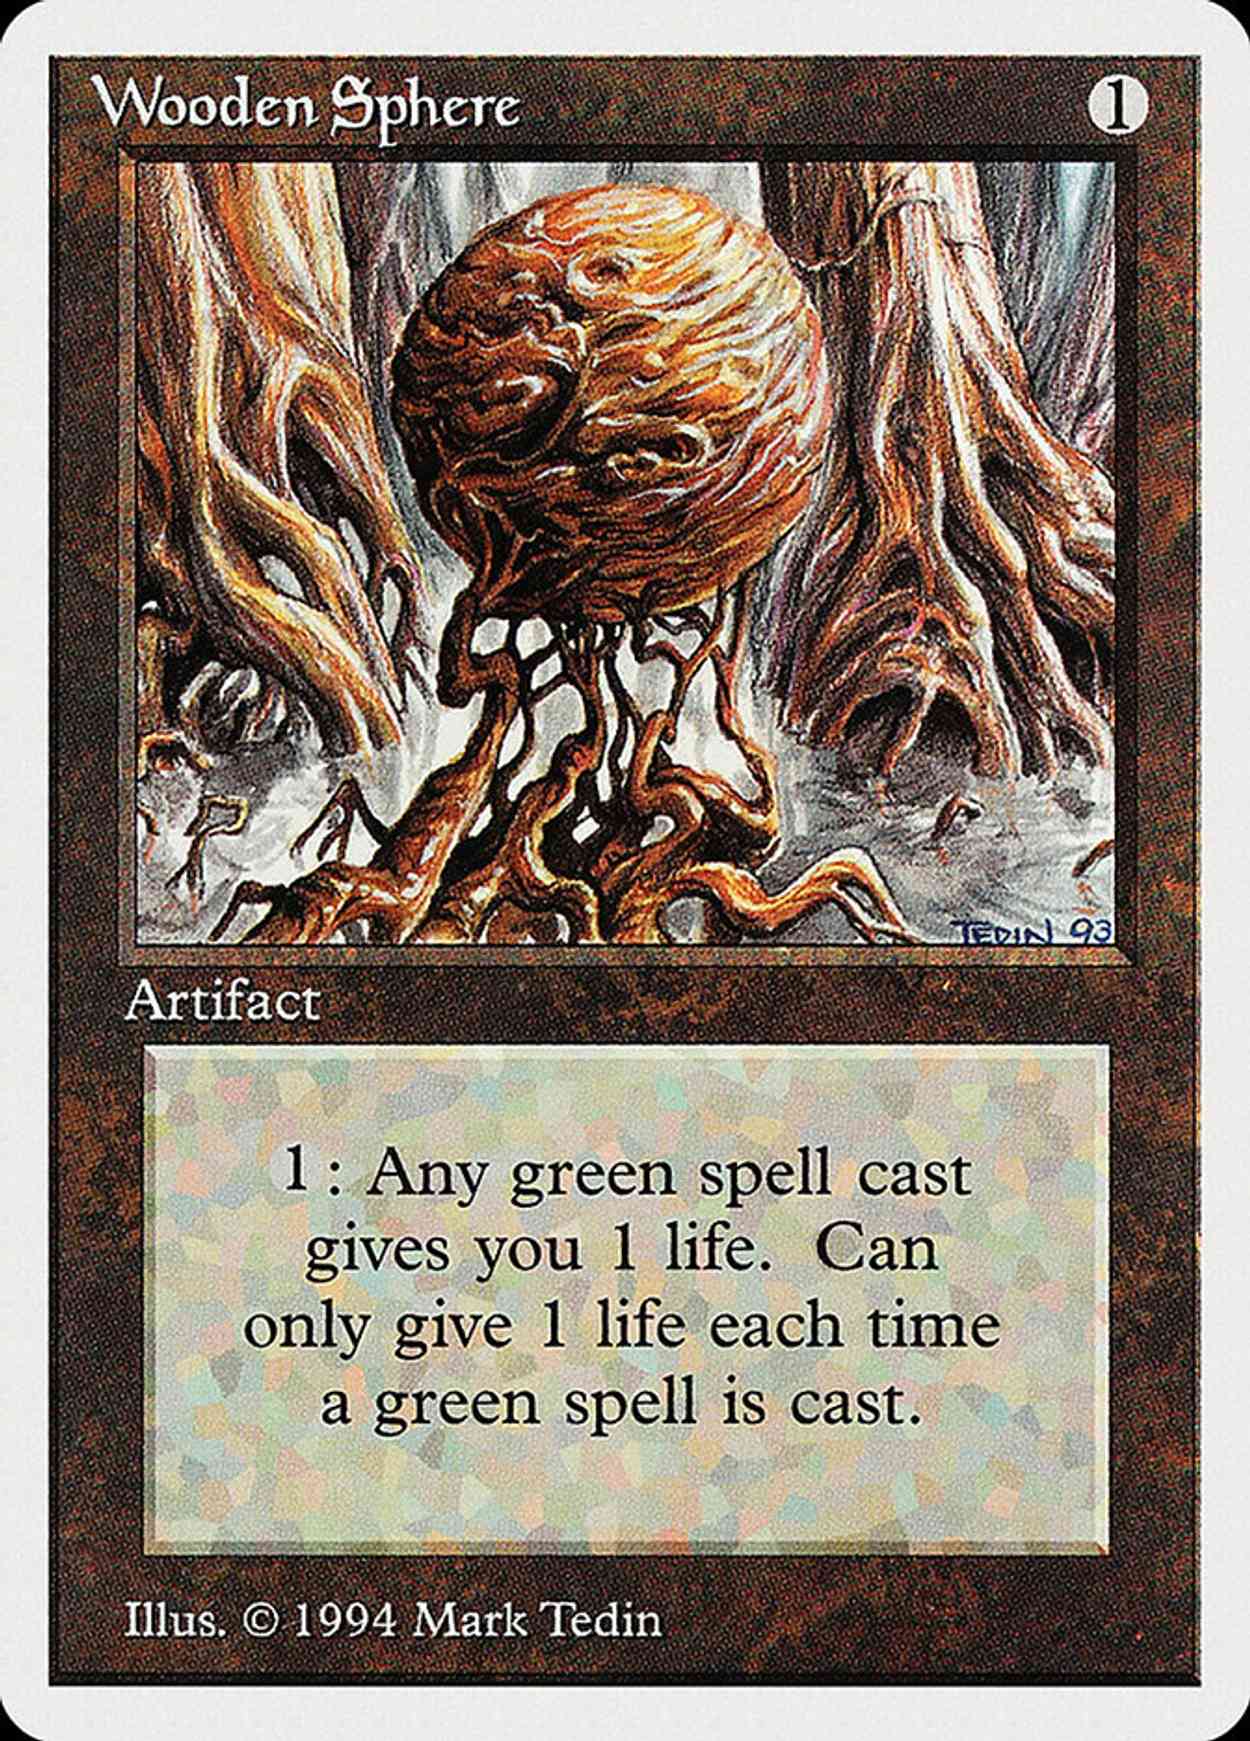 Wooden Sphere magic card front